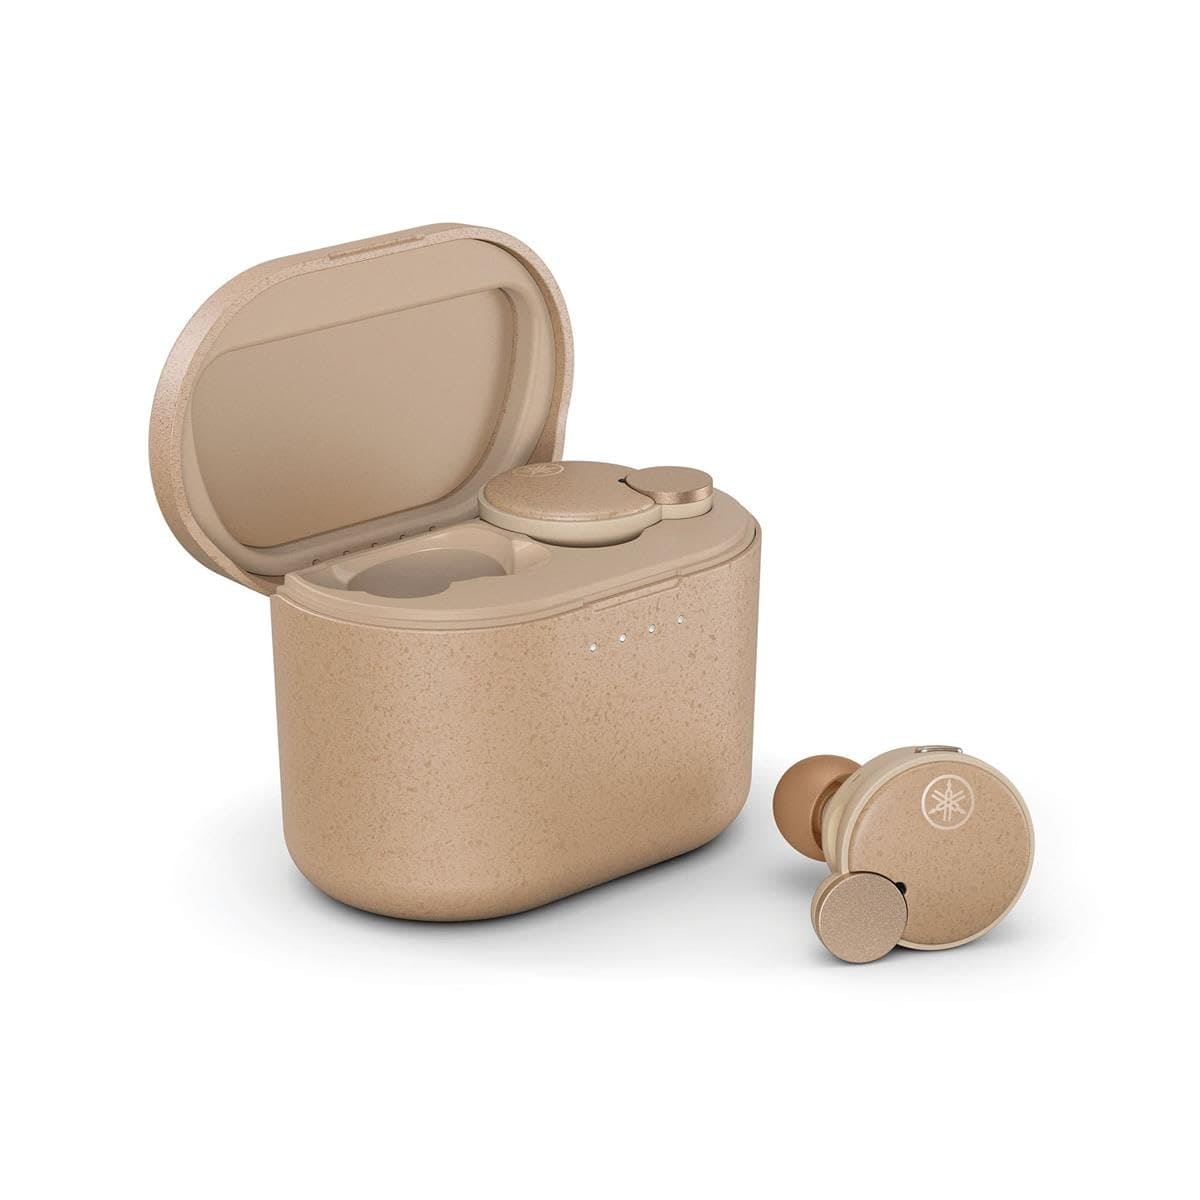 Yamaha TW-E7B True Wireless Earbuds with Bluetooth 5.2, Active Noise Cancelling, True Sound, Qualcomm CVC Clear Voice Capture, Advanced Listening Care and IPX5 Water-Resistant for Sport (Beige)